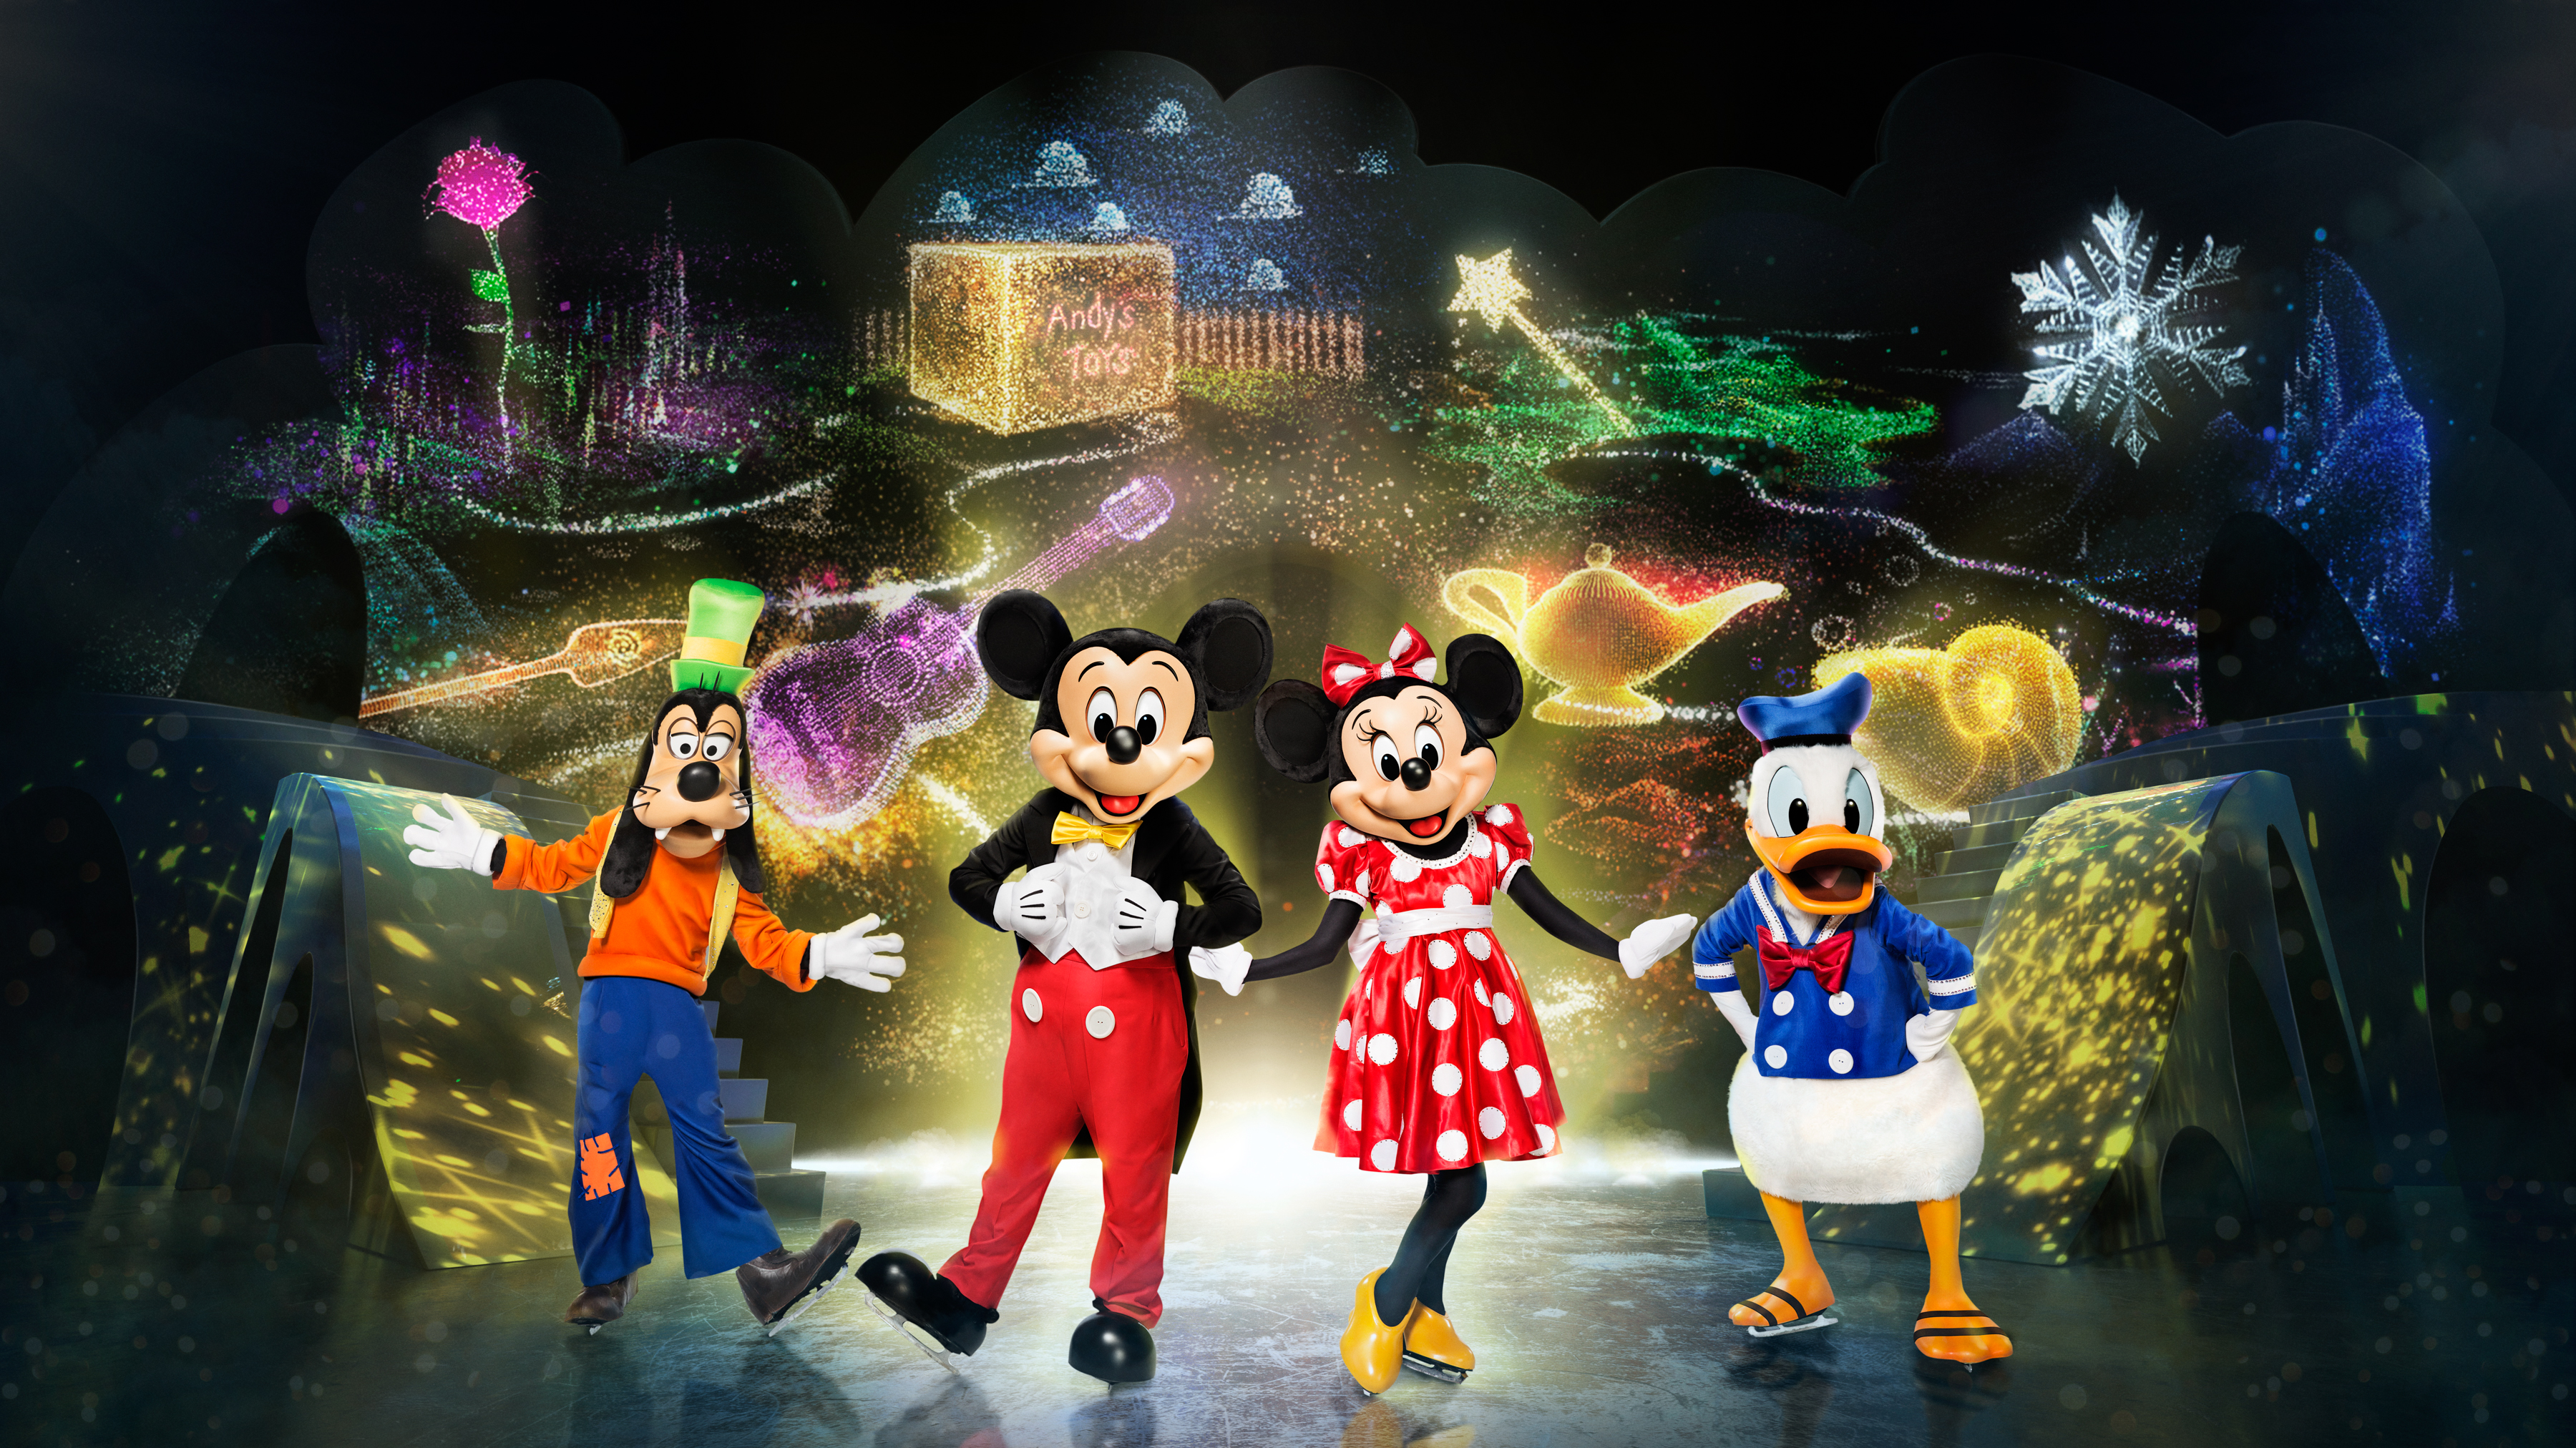 Disney On Ice Presents Mickey's Search Party